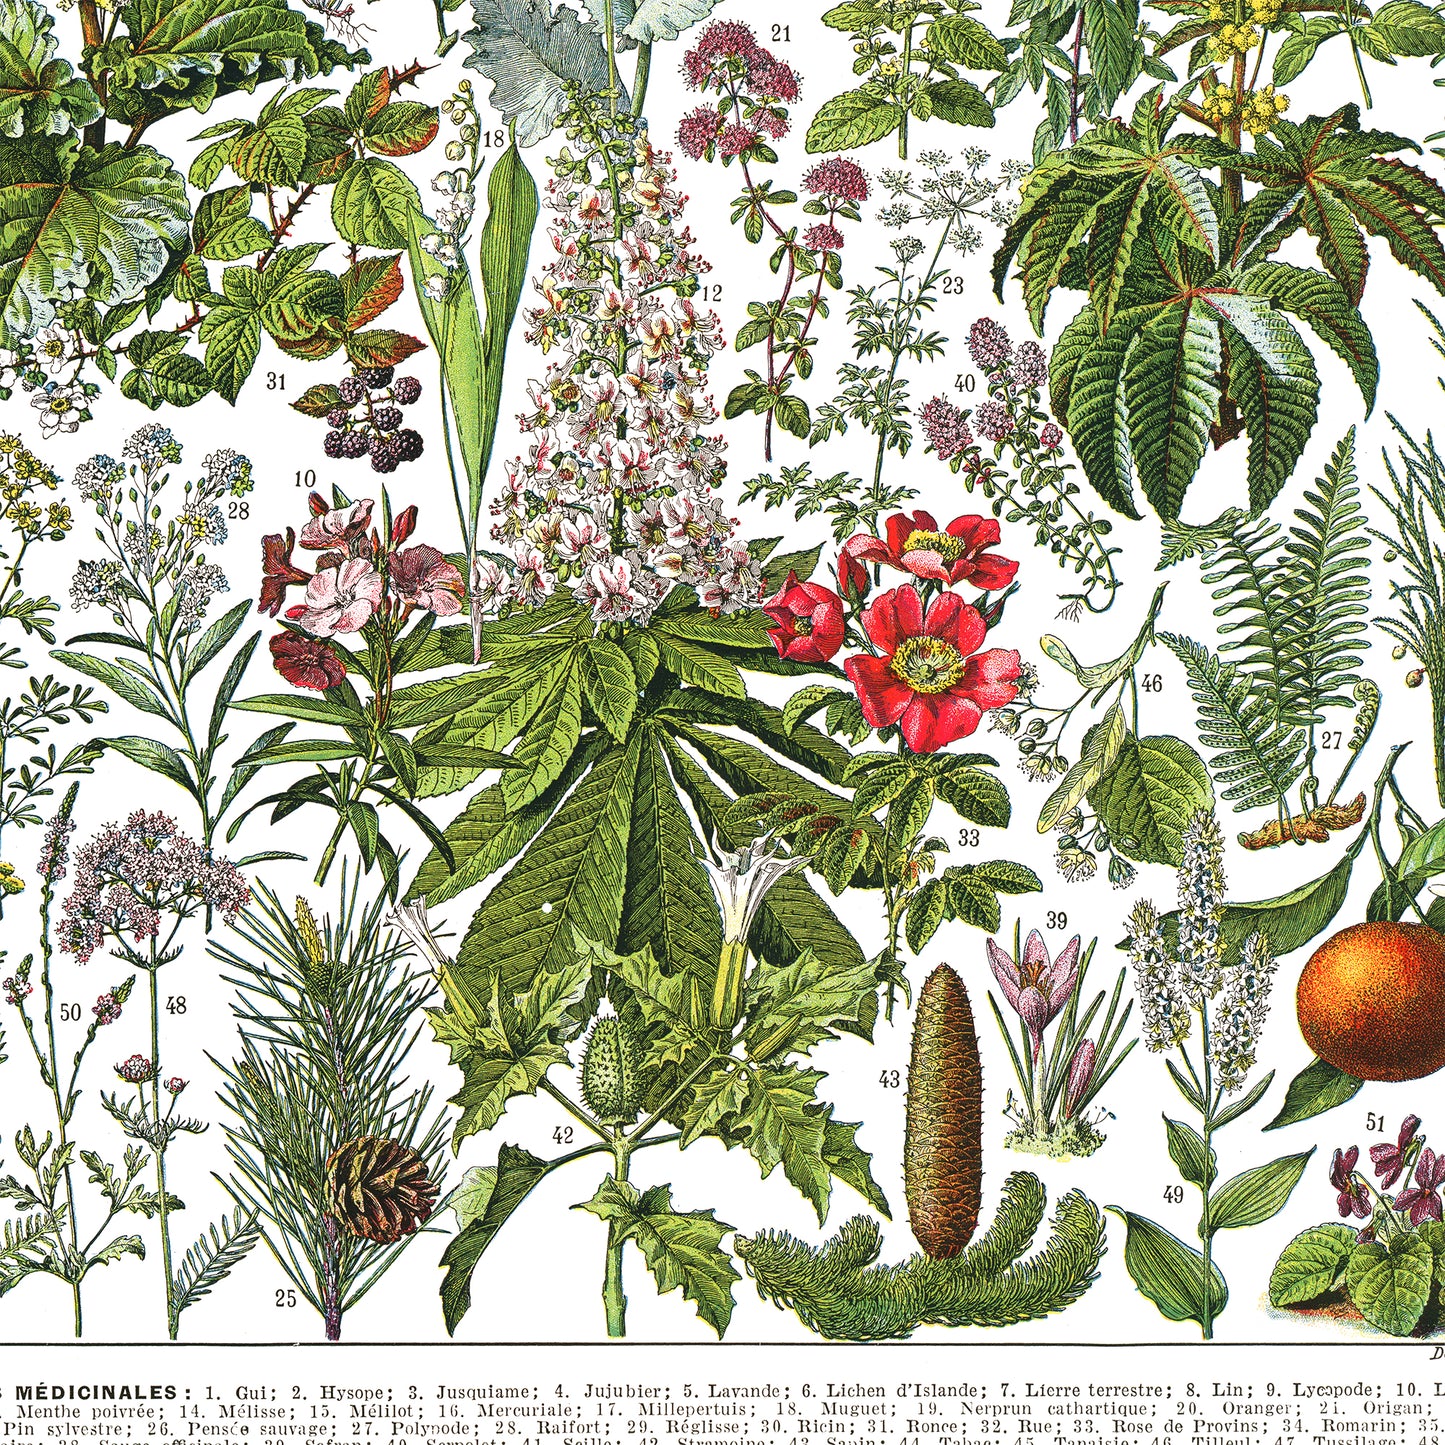 Large medicinal plants botanical poster G to Z by Adolphe Millot